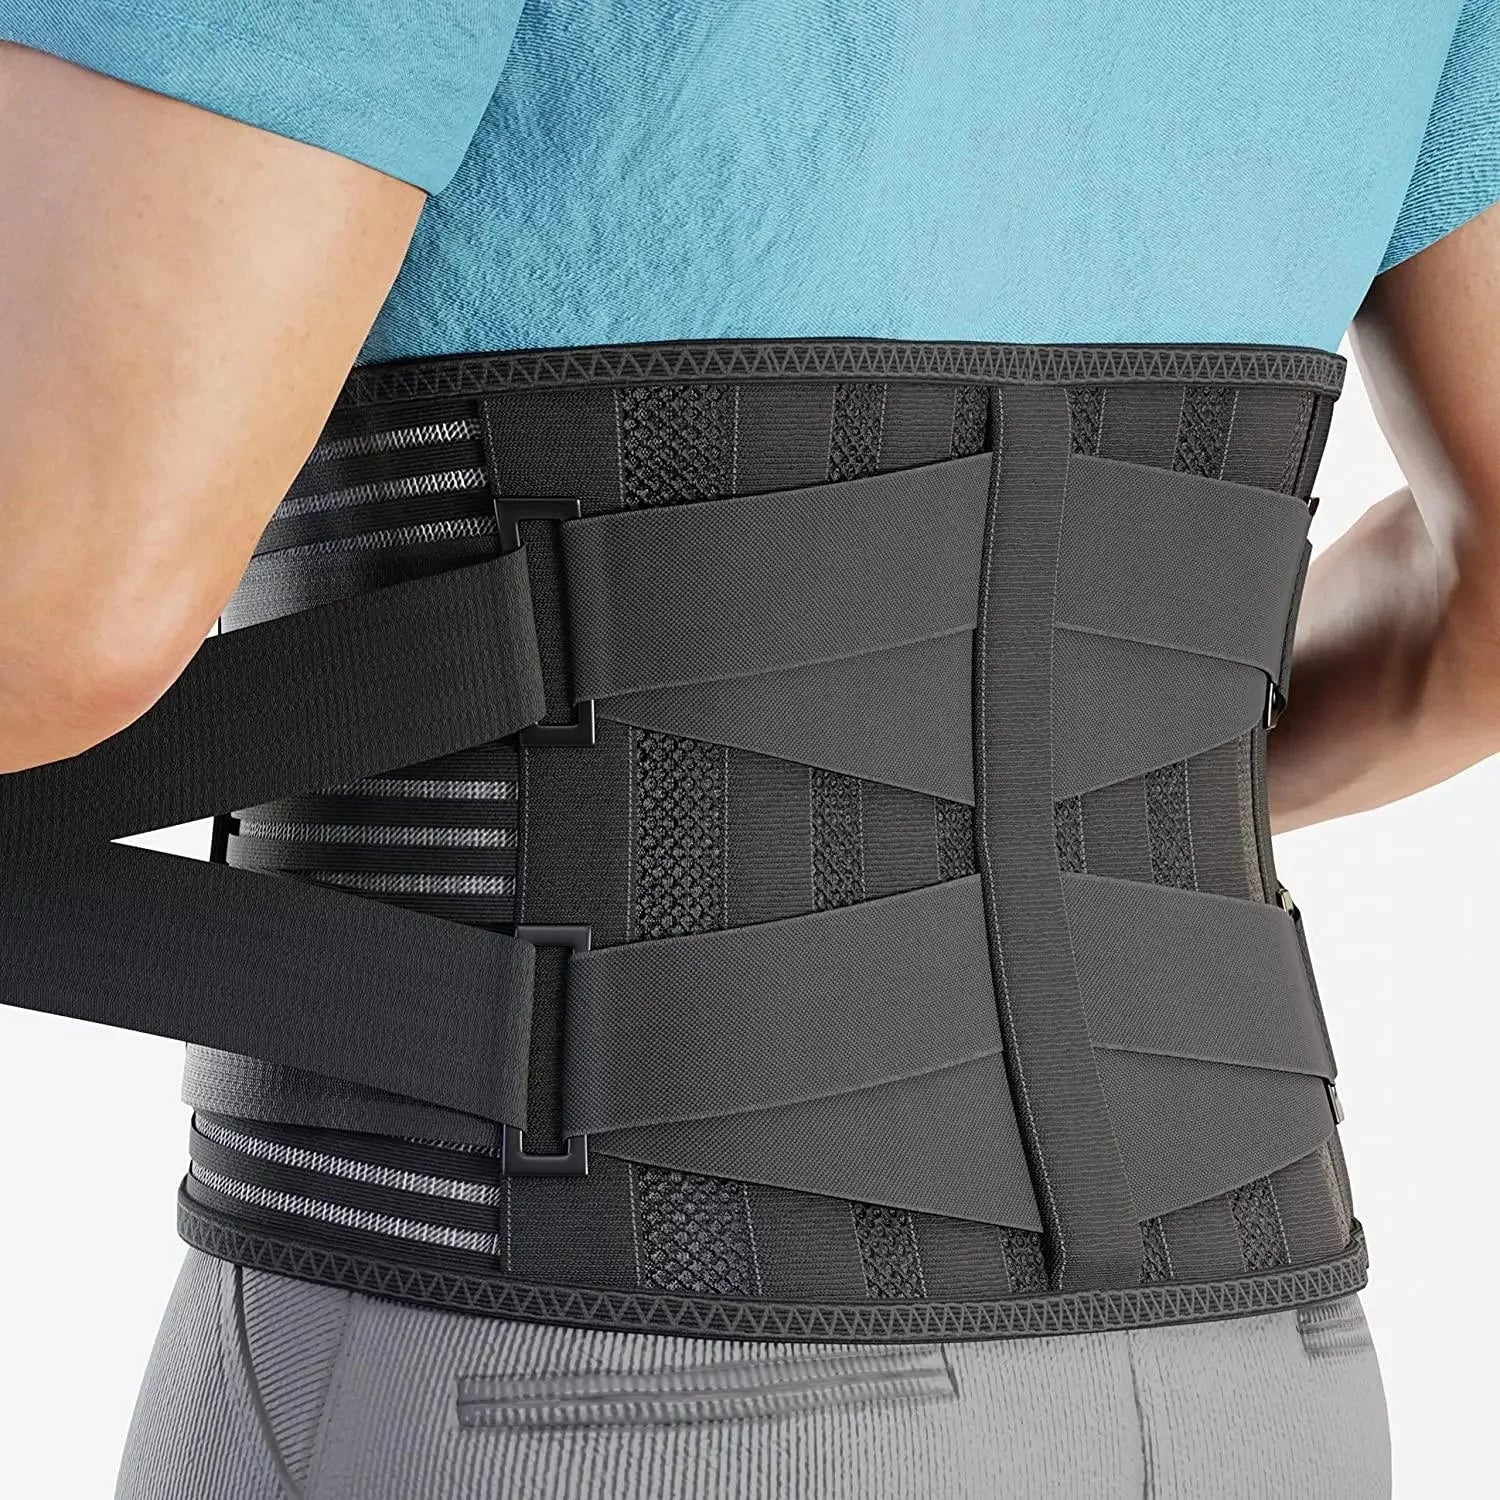 Low Back Pain: Should You Wear a Lumbar Support Belt or Not